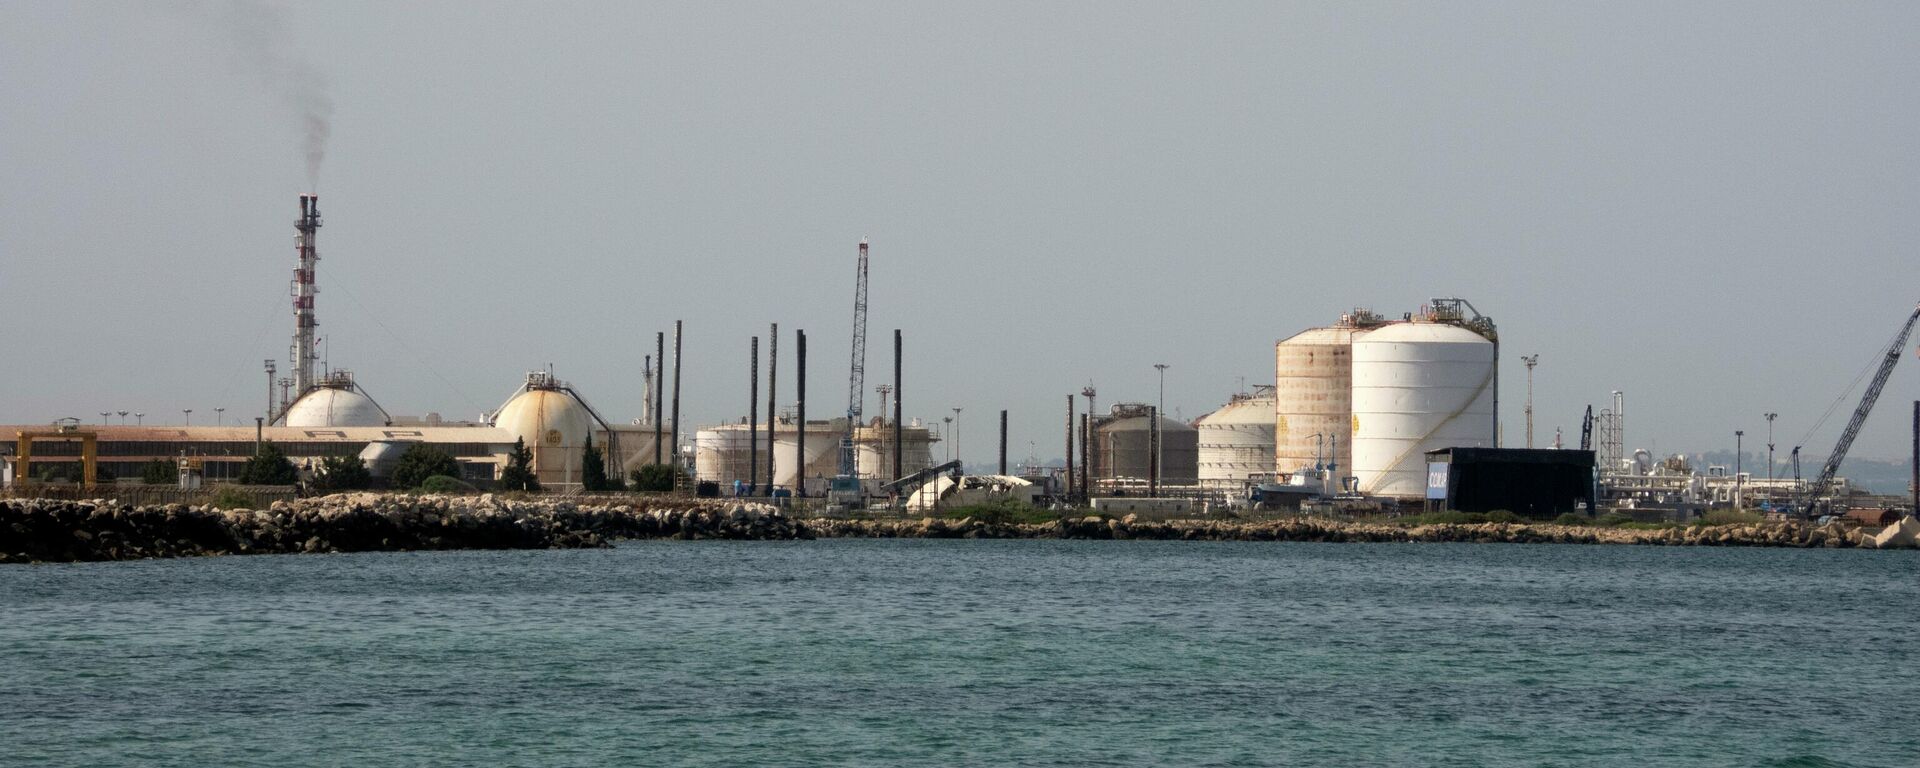 An external view of the ISAB refinery in Priolo-Gargallo near Syracuse, Sicily, Tuesday, May 31, 2022. - Sputnik International, 1920, 02.11.2022